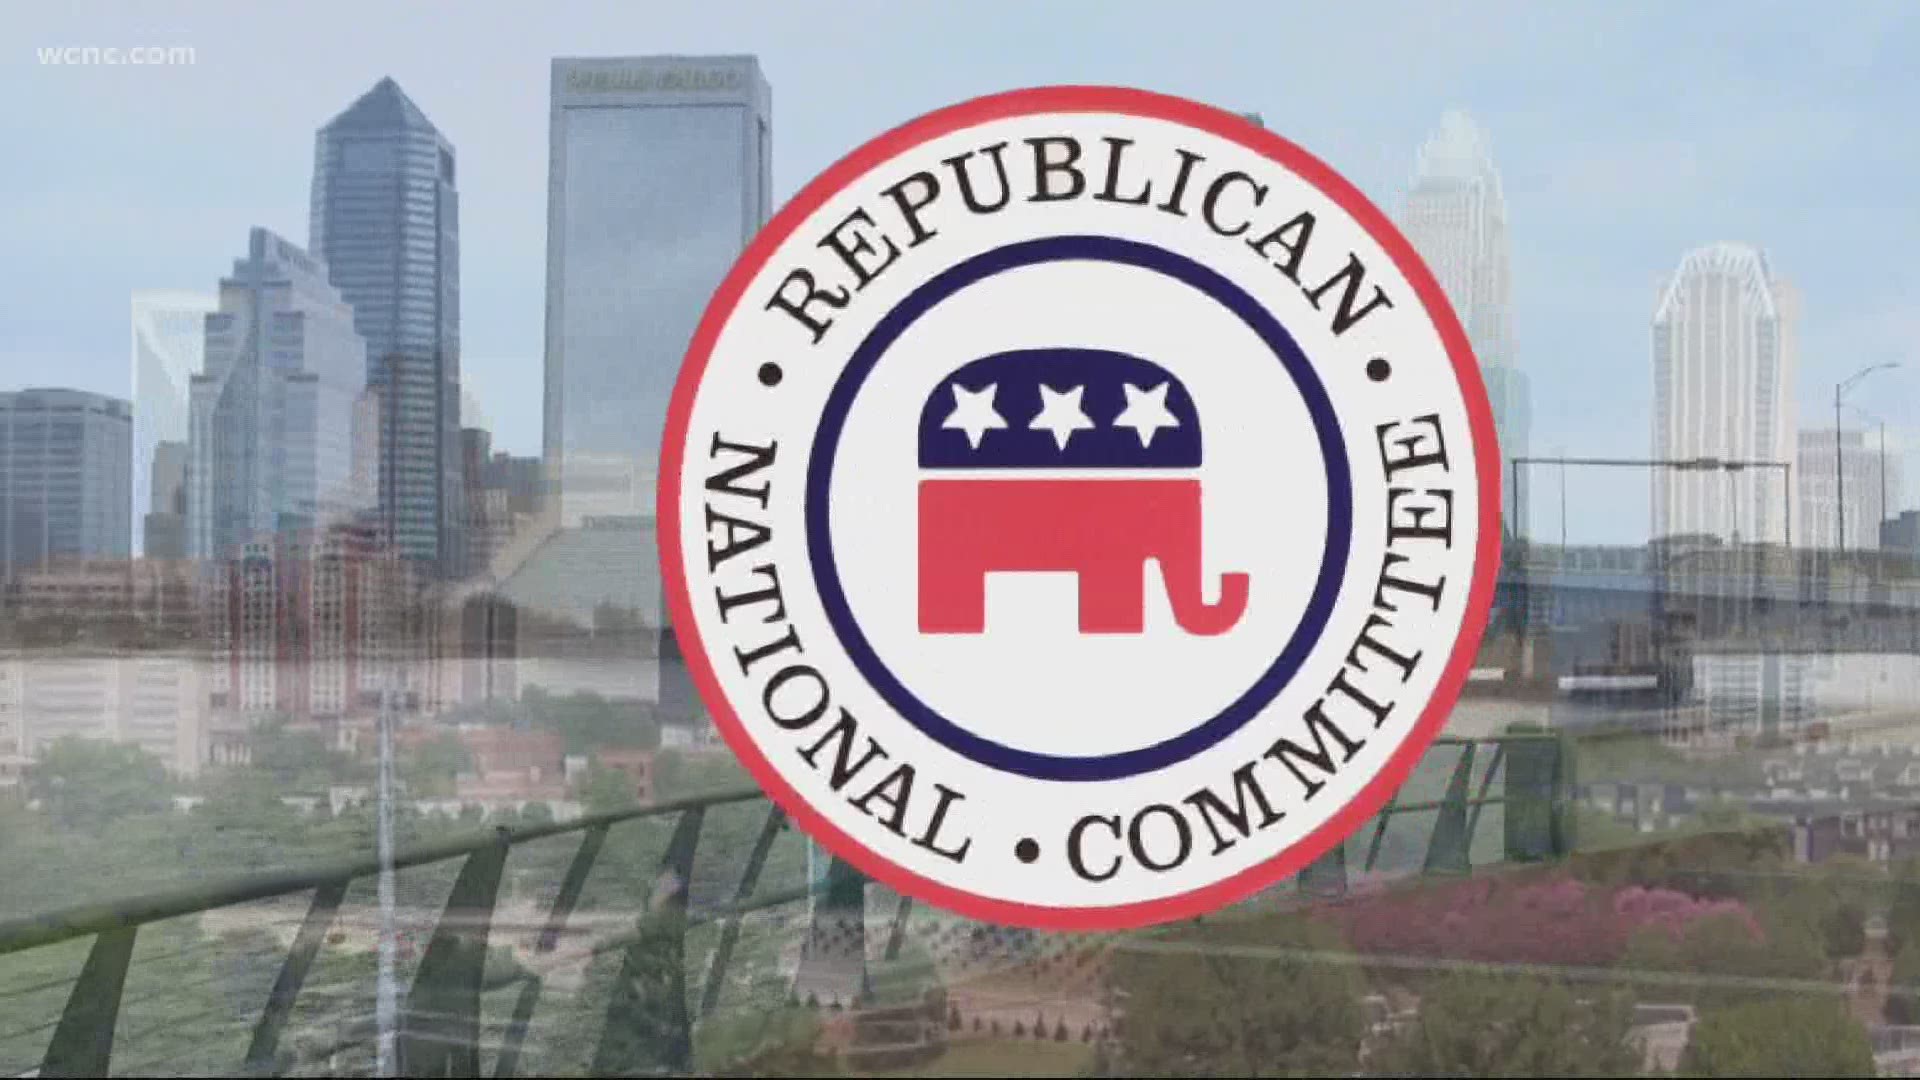 Reports say the RNC has tentatively chosen Jacksonville as the new location for the event.